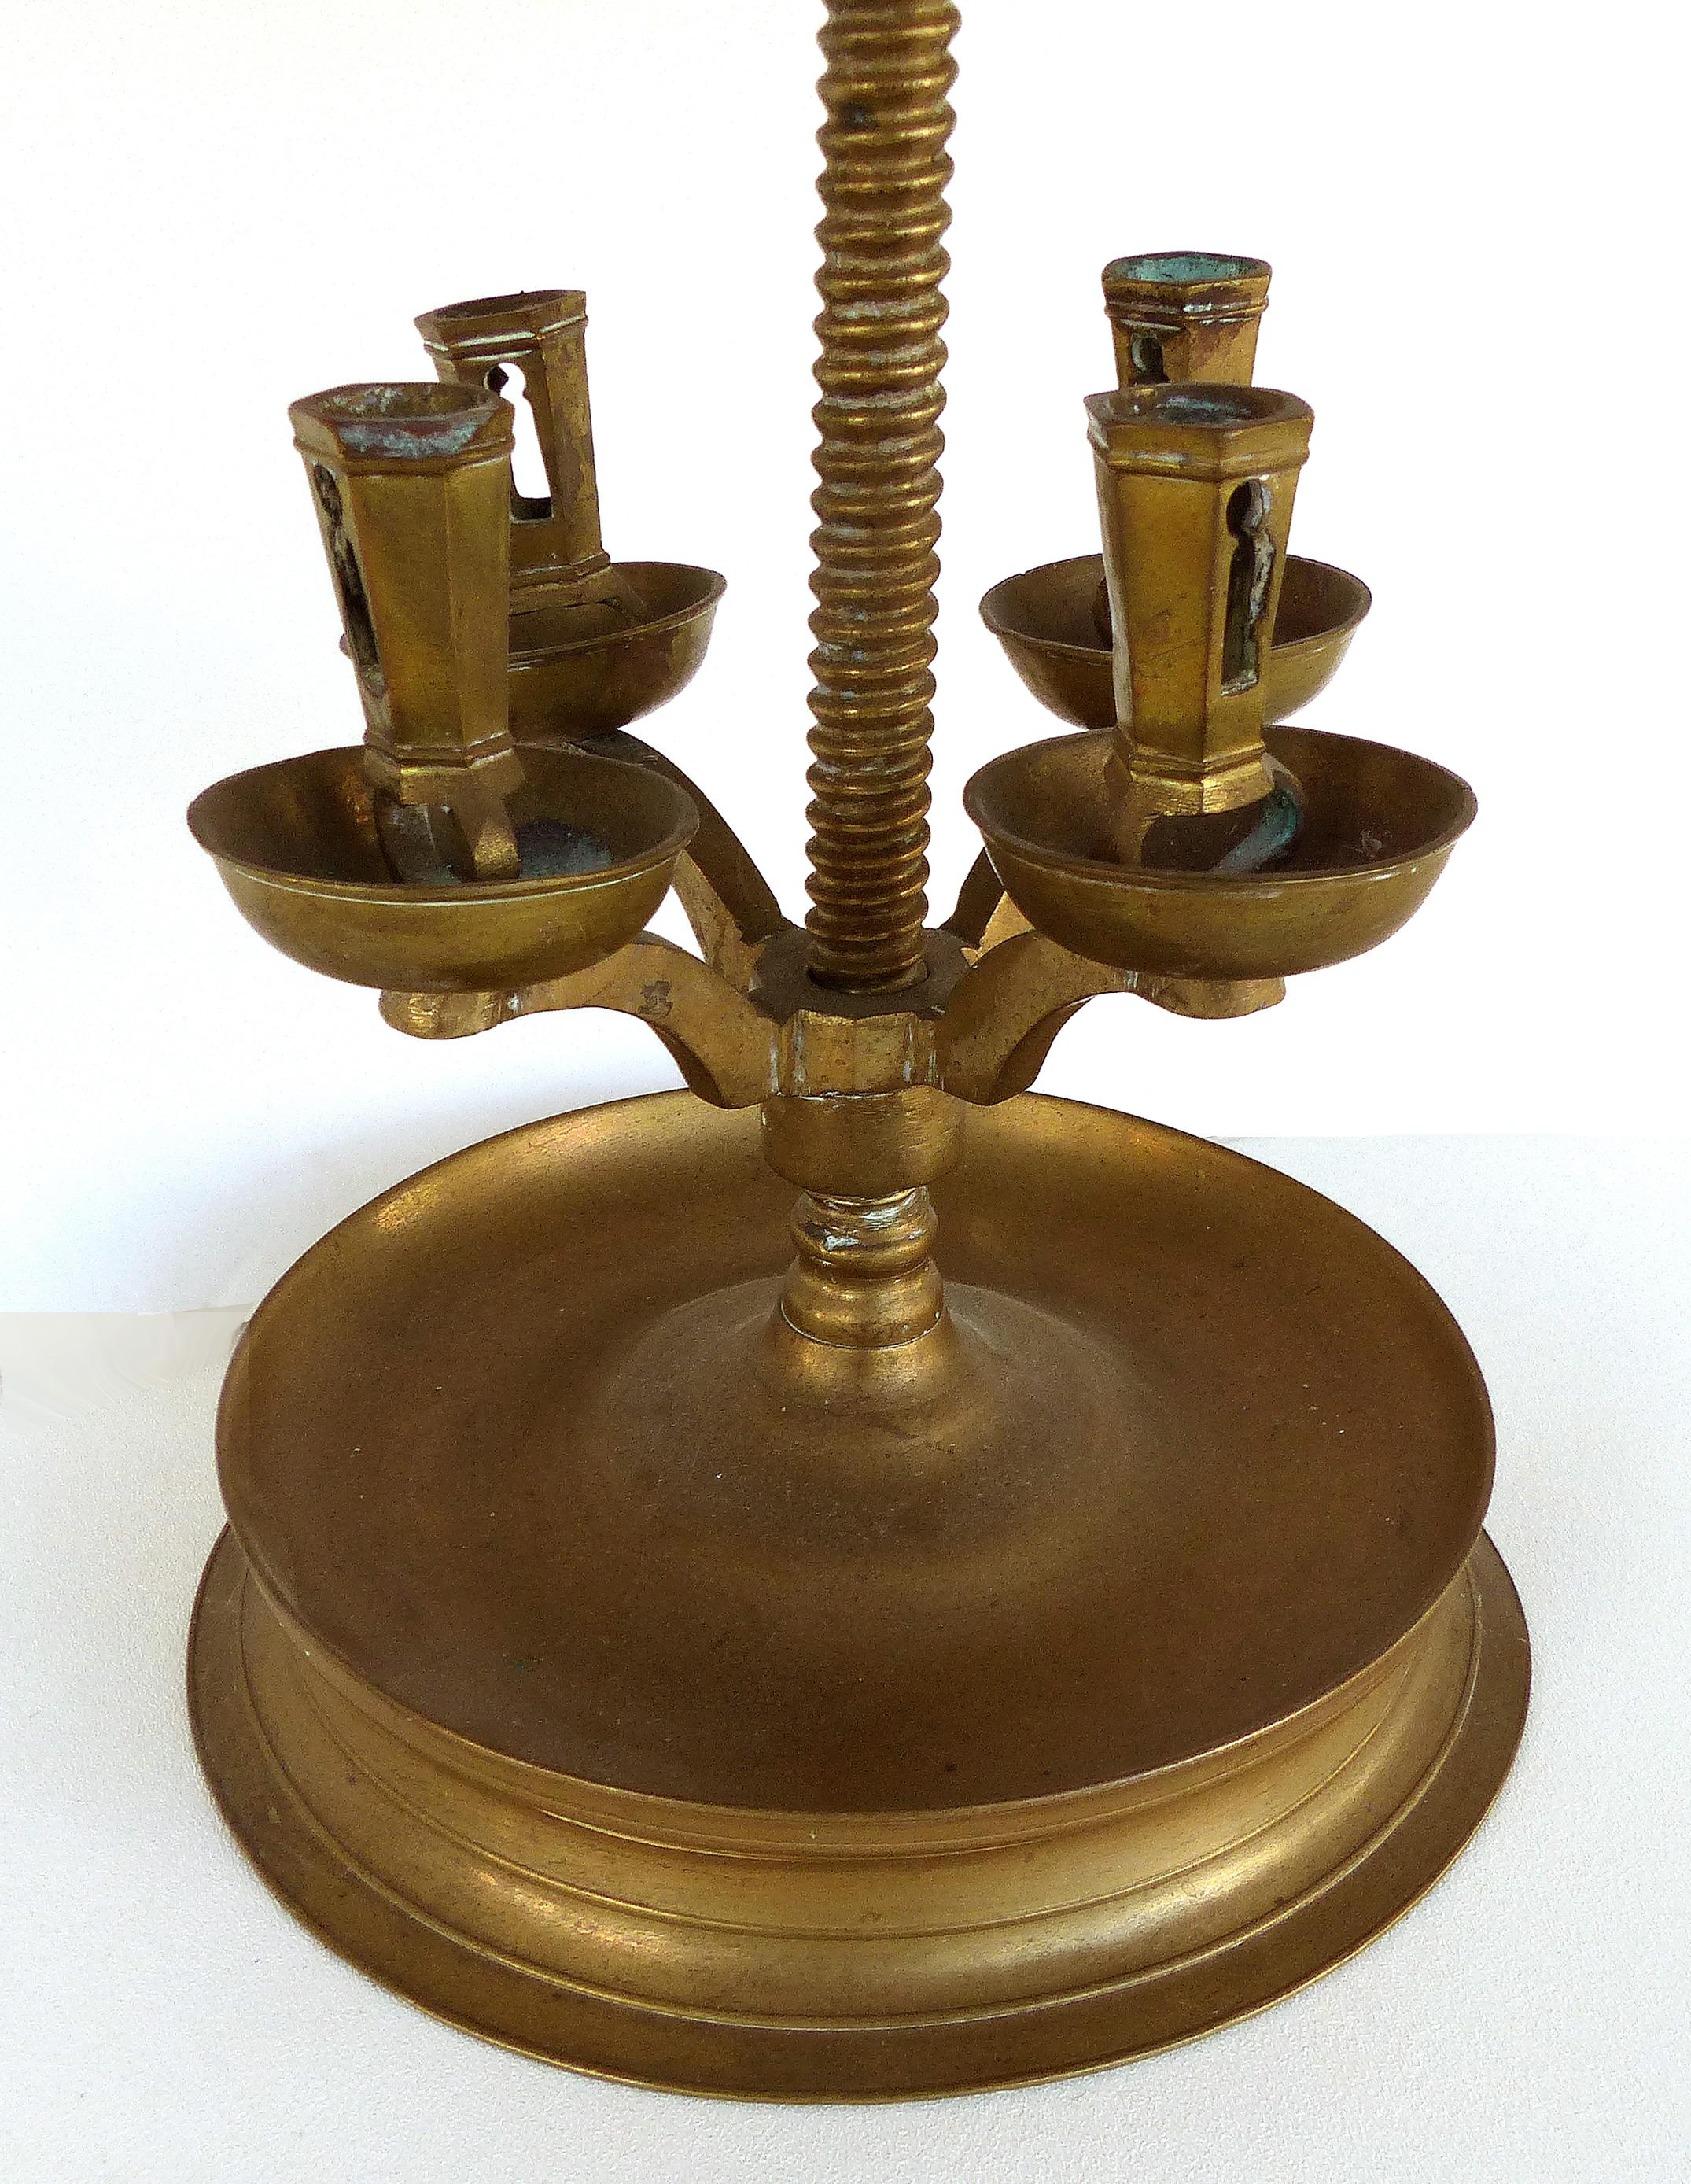 Fabric Brass 19th Century Candelabra Mounted as a Table Lamp, Including a String Shade